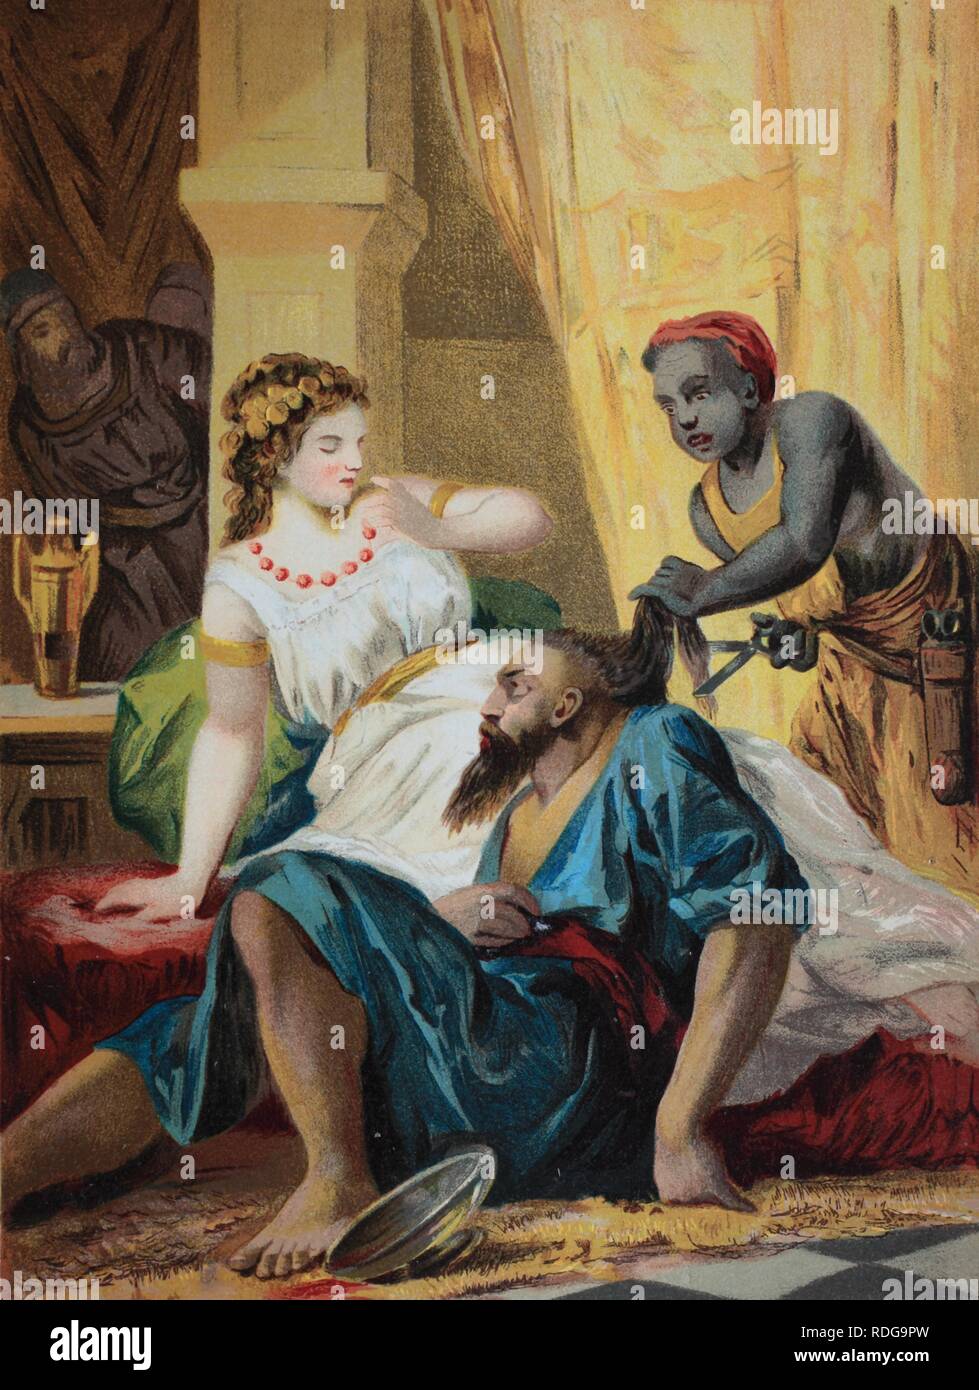 Samson and Delilah, chromolithograph from a home bible, 1870 Stock Photo